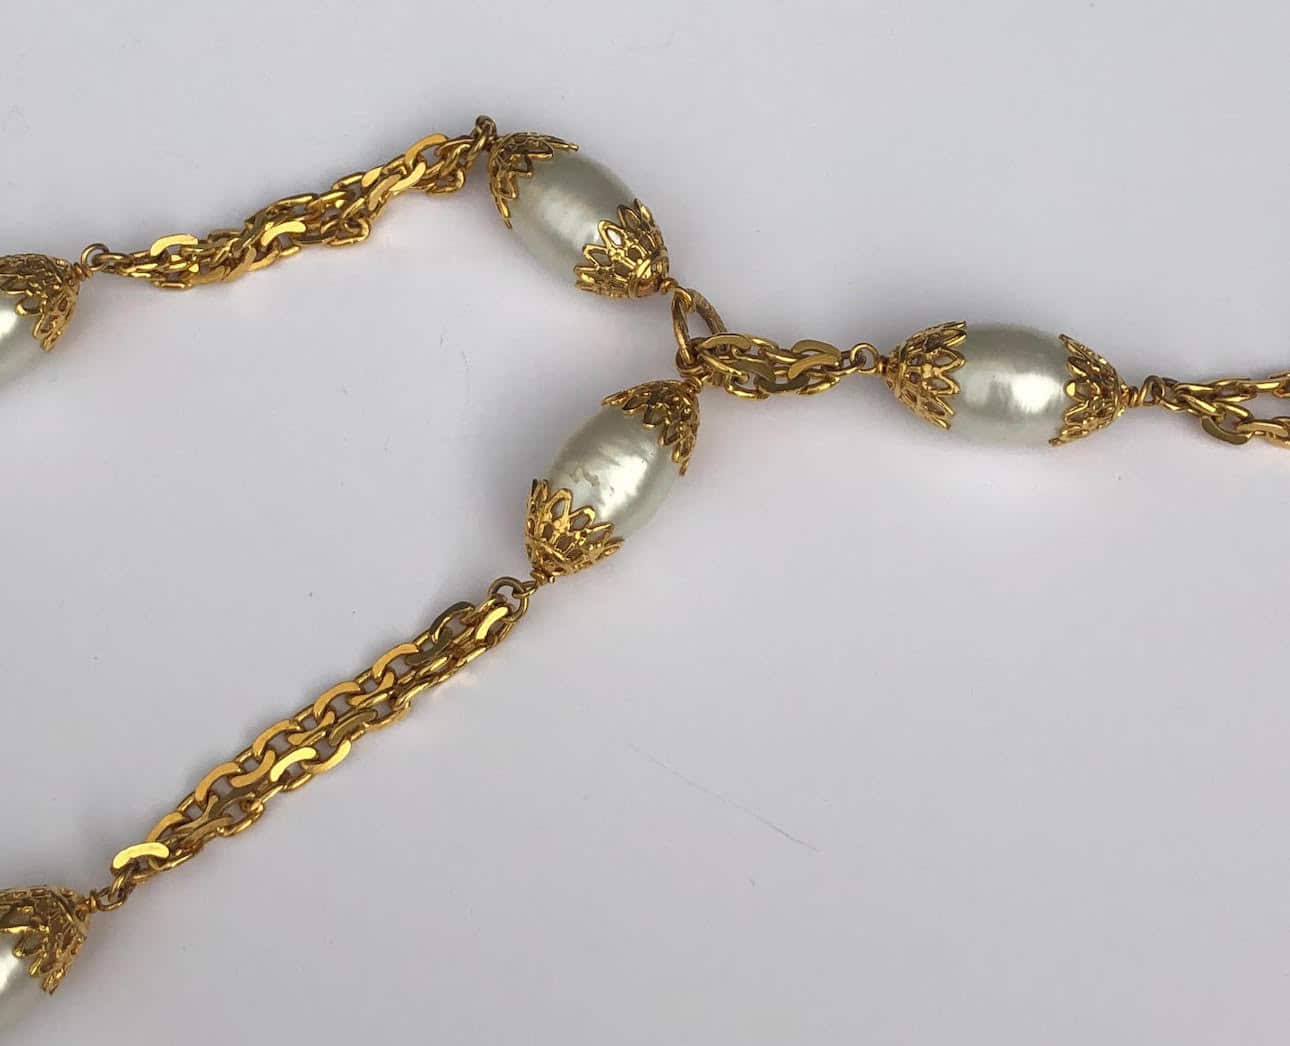 CHANEL 1996 Double Strand Pearls Chain Necklace W/Pendant - Chelsea Vintage  Couture